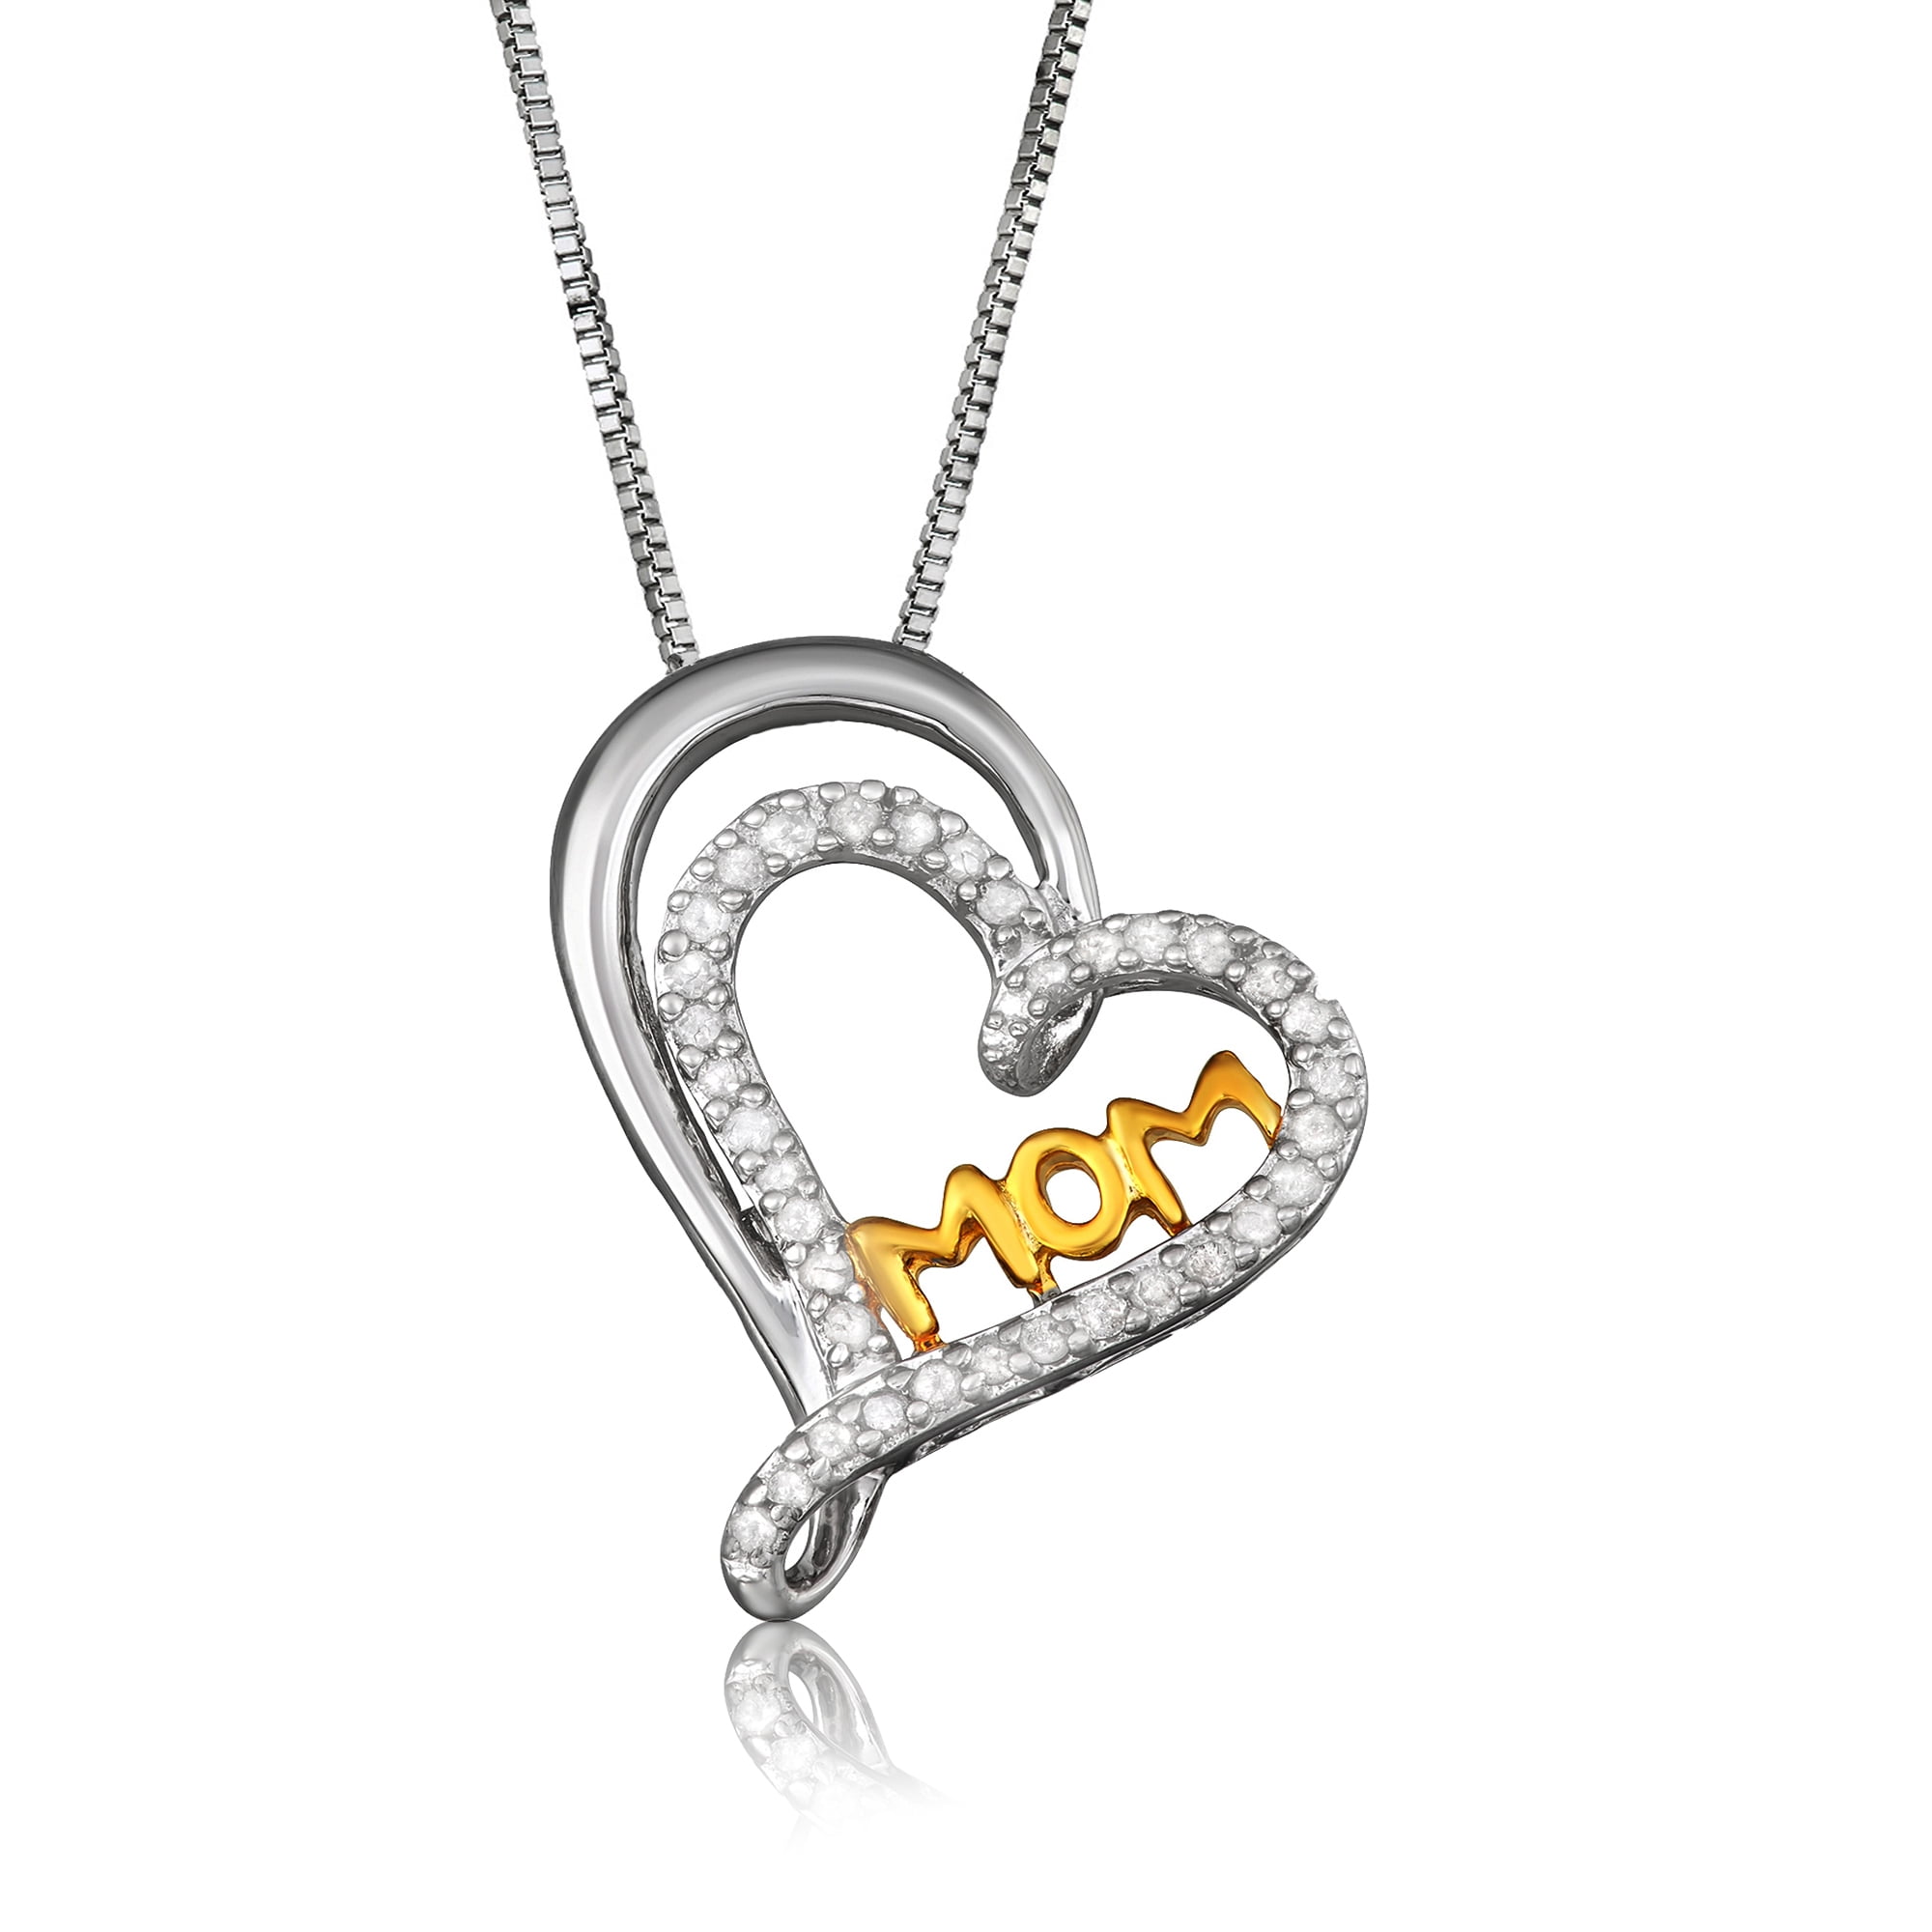 18ct Silver Plated Diamante “Mom” Heart Shaped Chain/Necklace & Pendant Set 